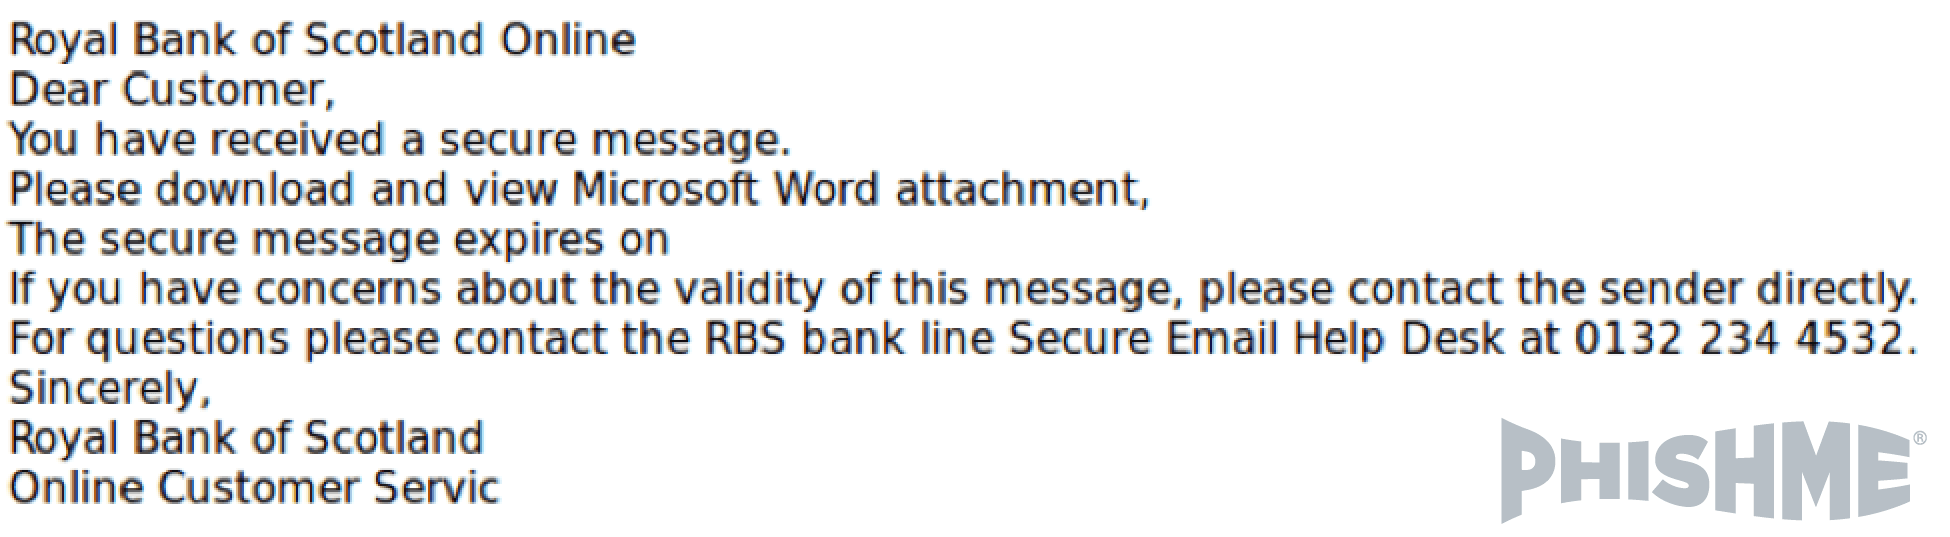 Email virus in action: Image of infected email with malicious attachment"